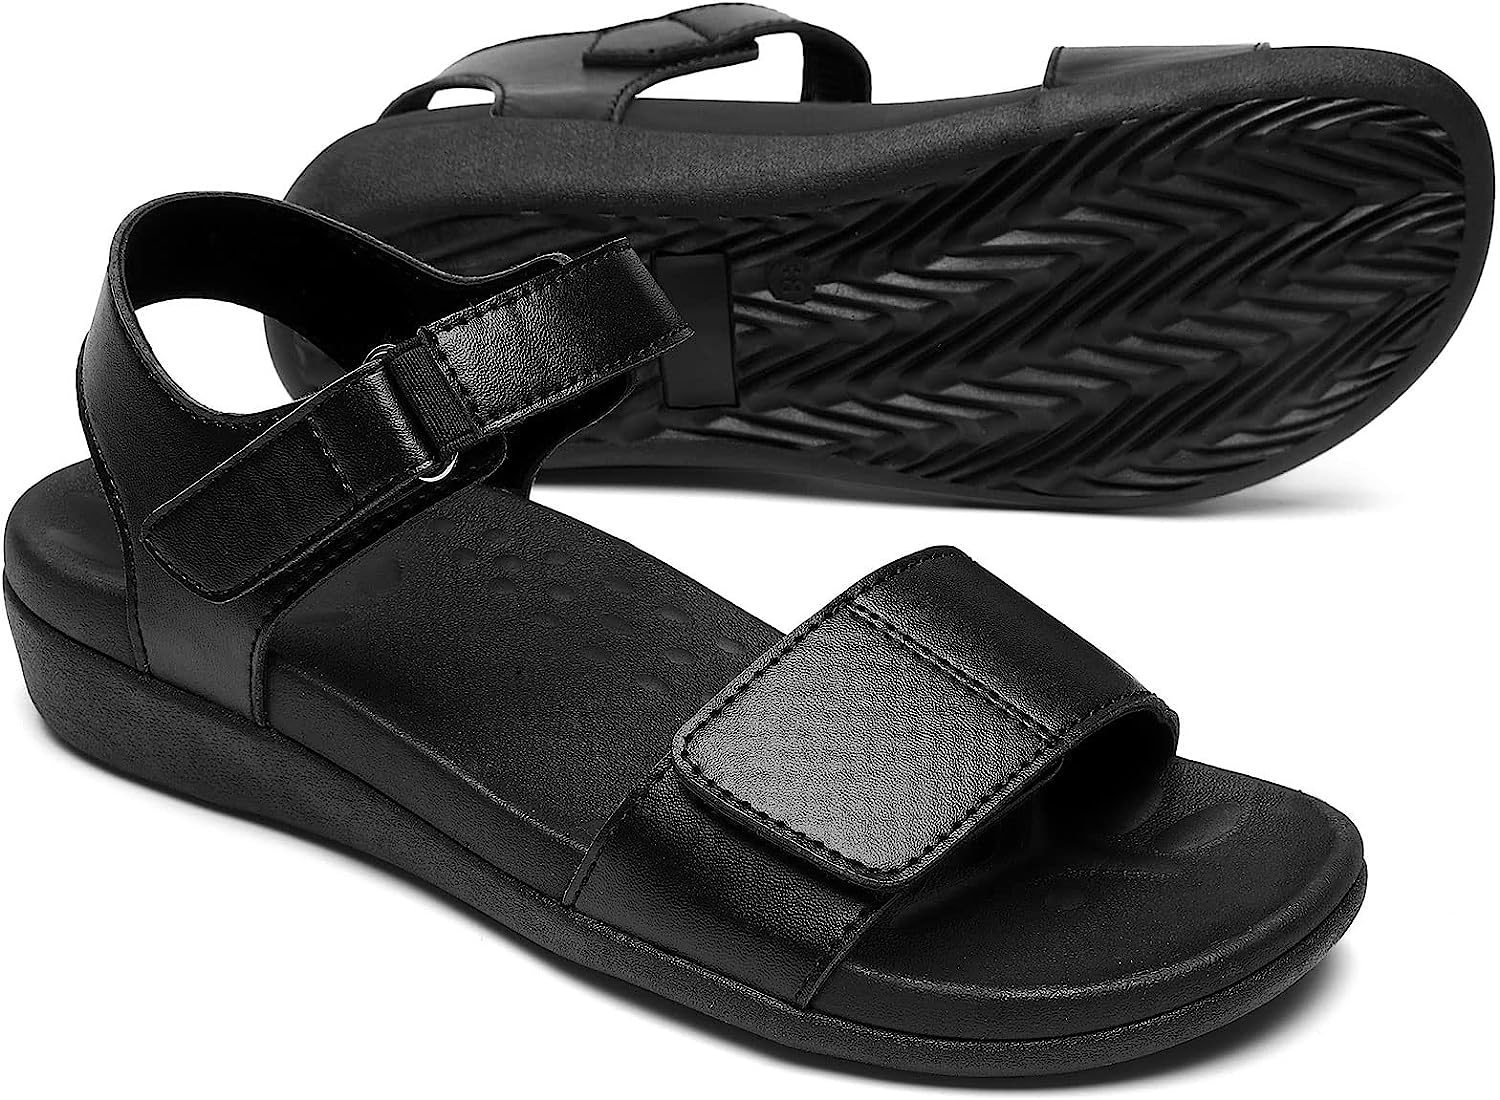 MEGNYA Comfortable Arch Support Walking Sandals for [...]